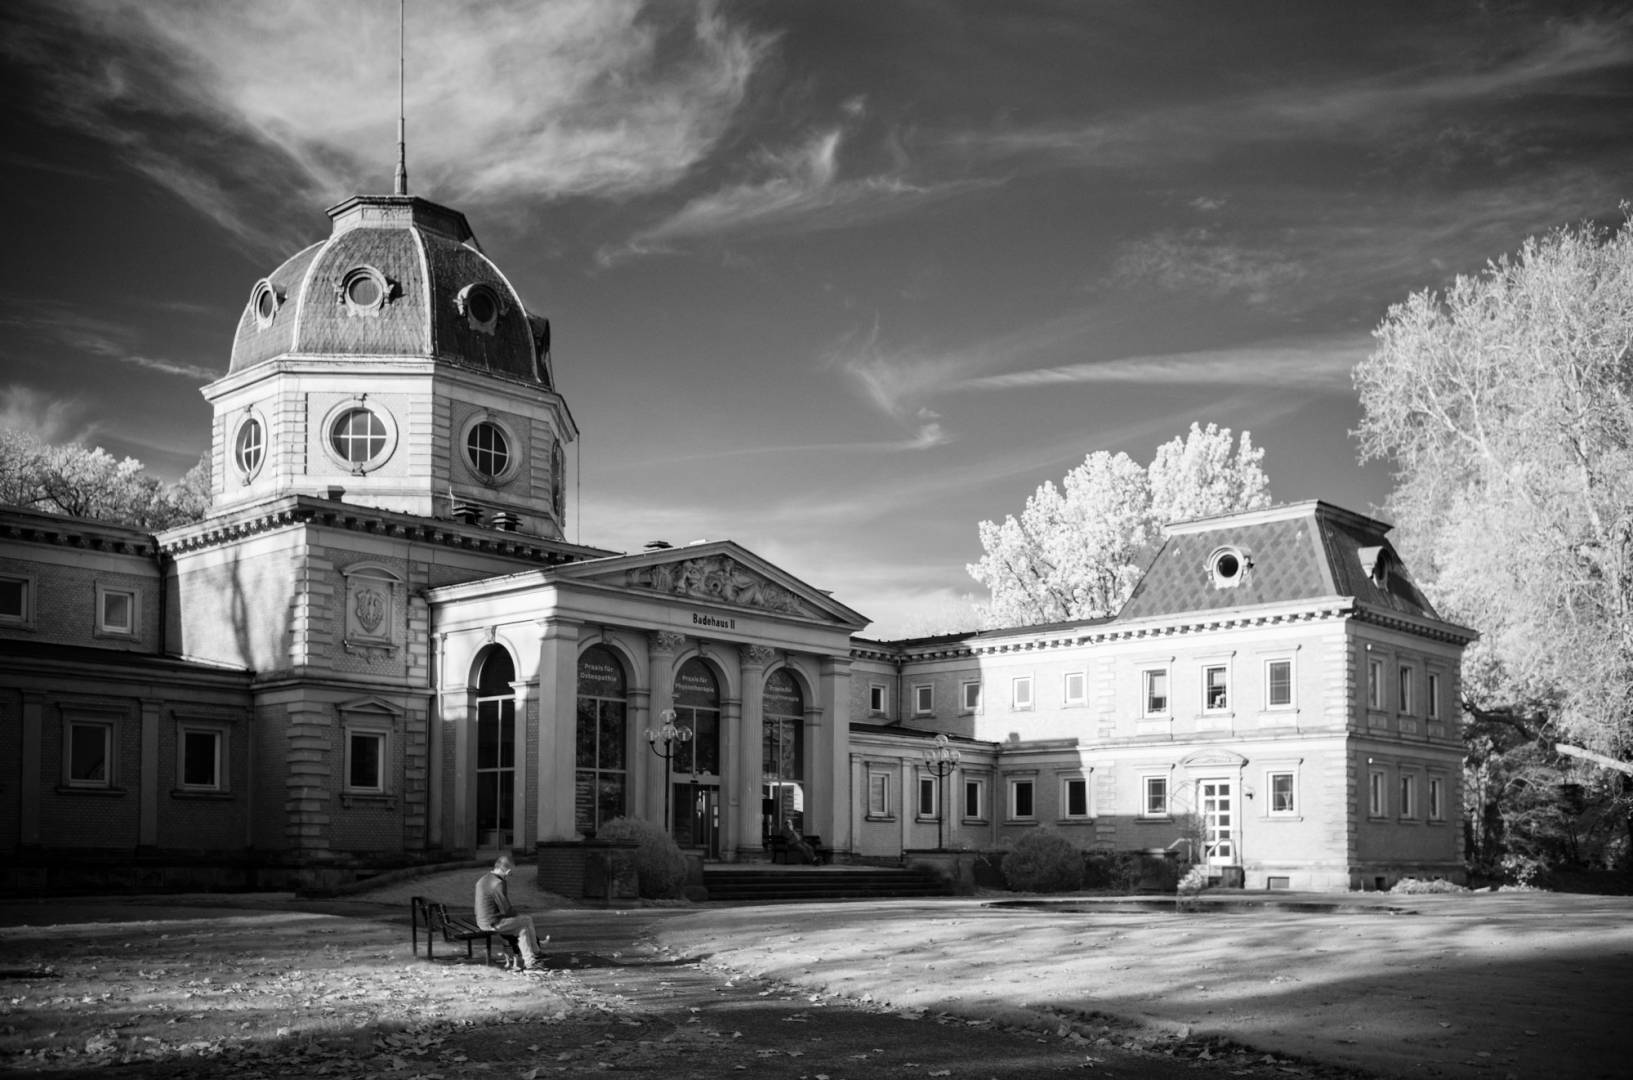 Badehaus II in Bad Oeynhausen. Leica M10-M with 35mm Summilux 1/125s f/2.8 ISO 3200 Infrared Filter 715